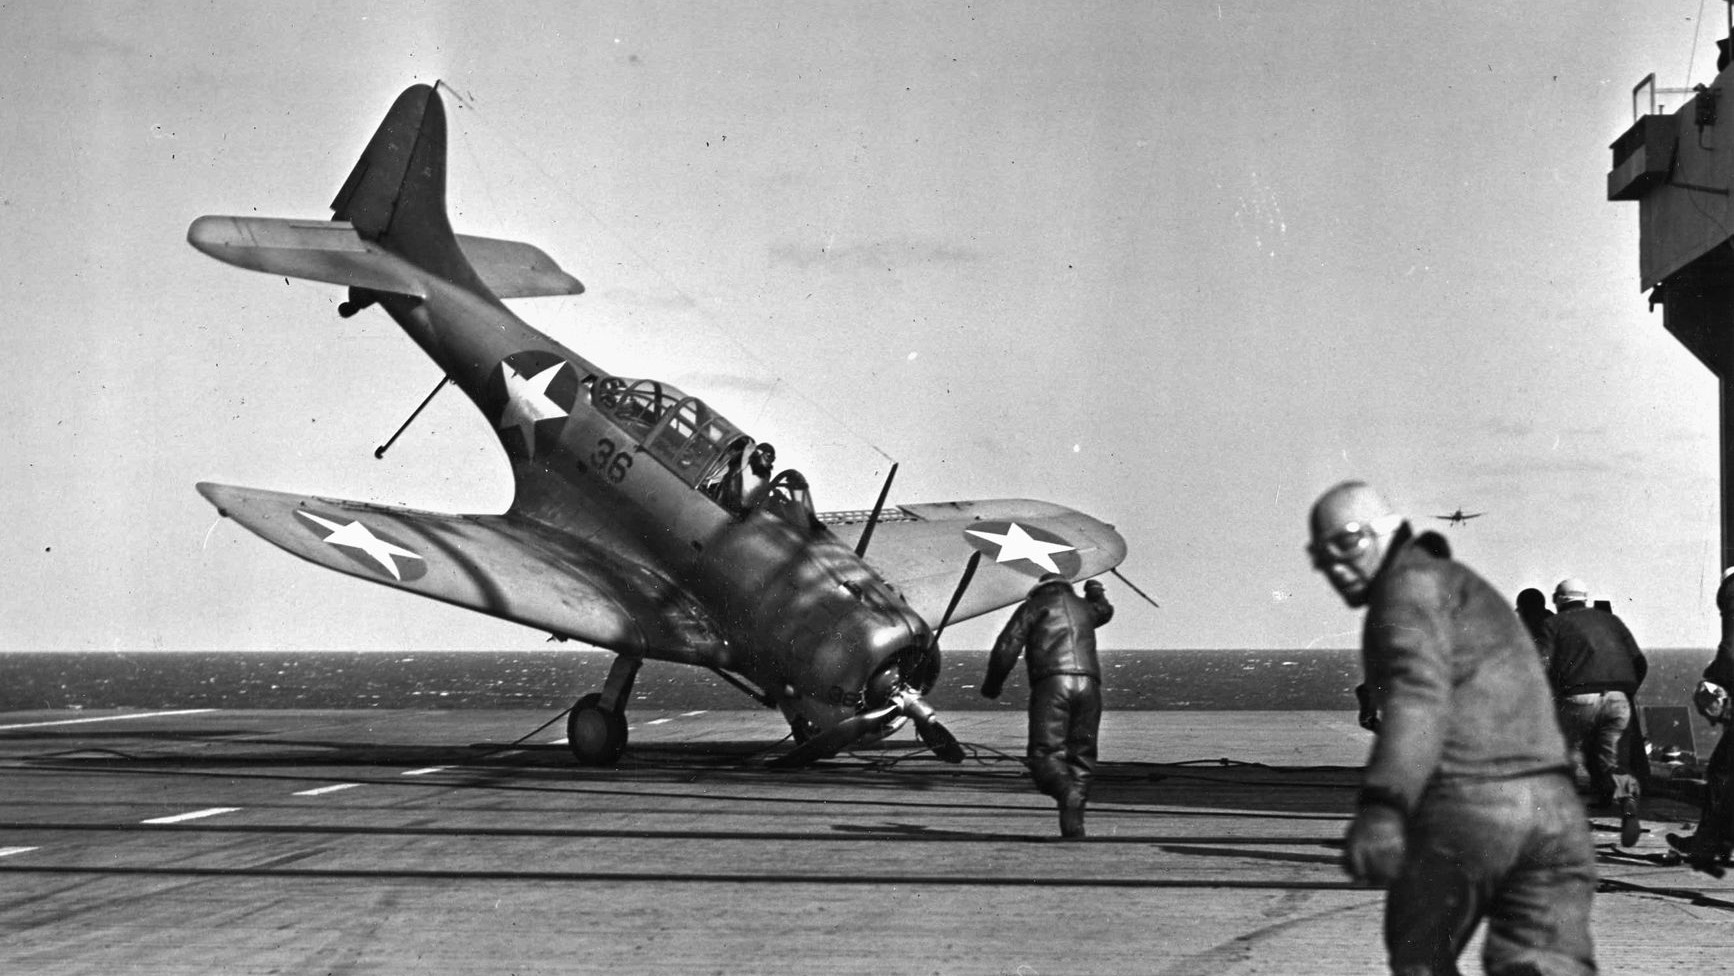 Deck crewmen race to an SBD Dauntless dive bomber after a barrier crash. The extended tailhook failed to catch the arresting wire, but the propeller stopped the forward momentum, almost flipping the plane. Aviators claimed that SBD stood for “Slow But Deadly.”